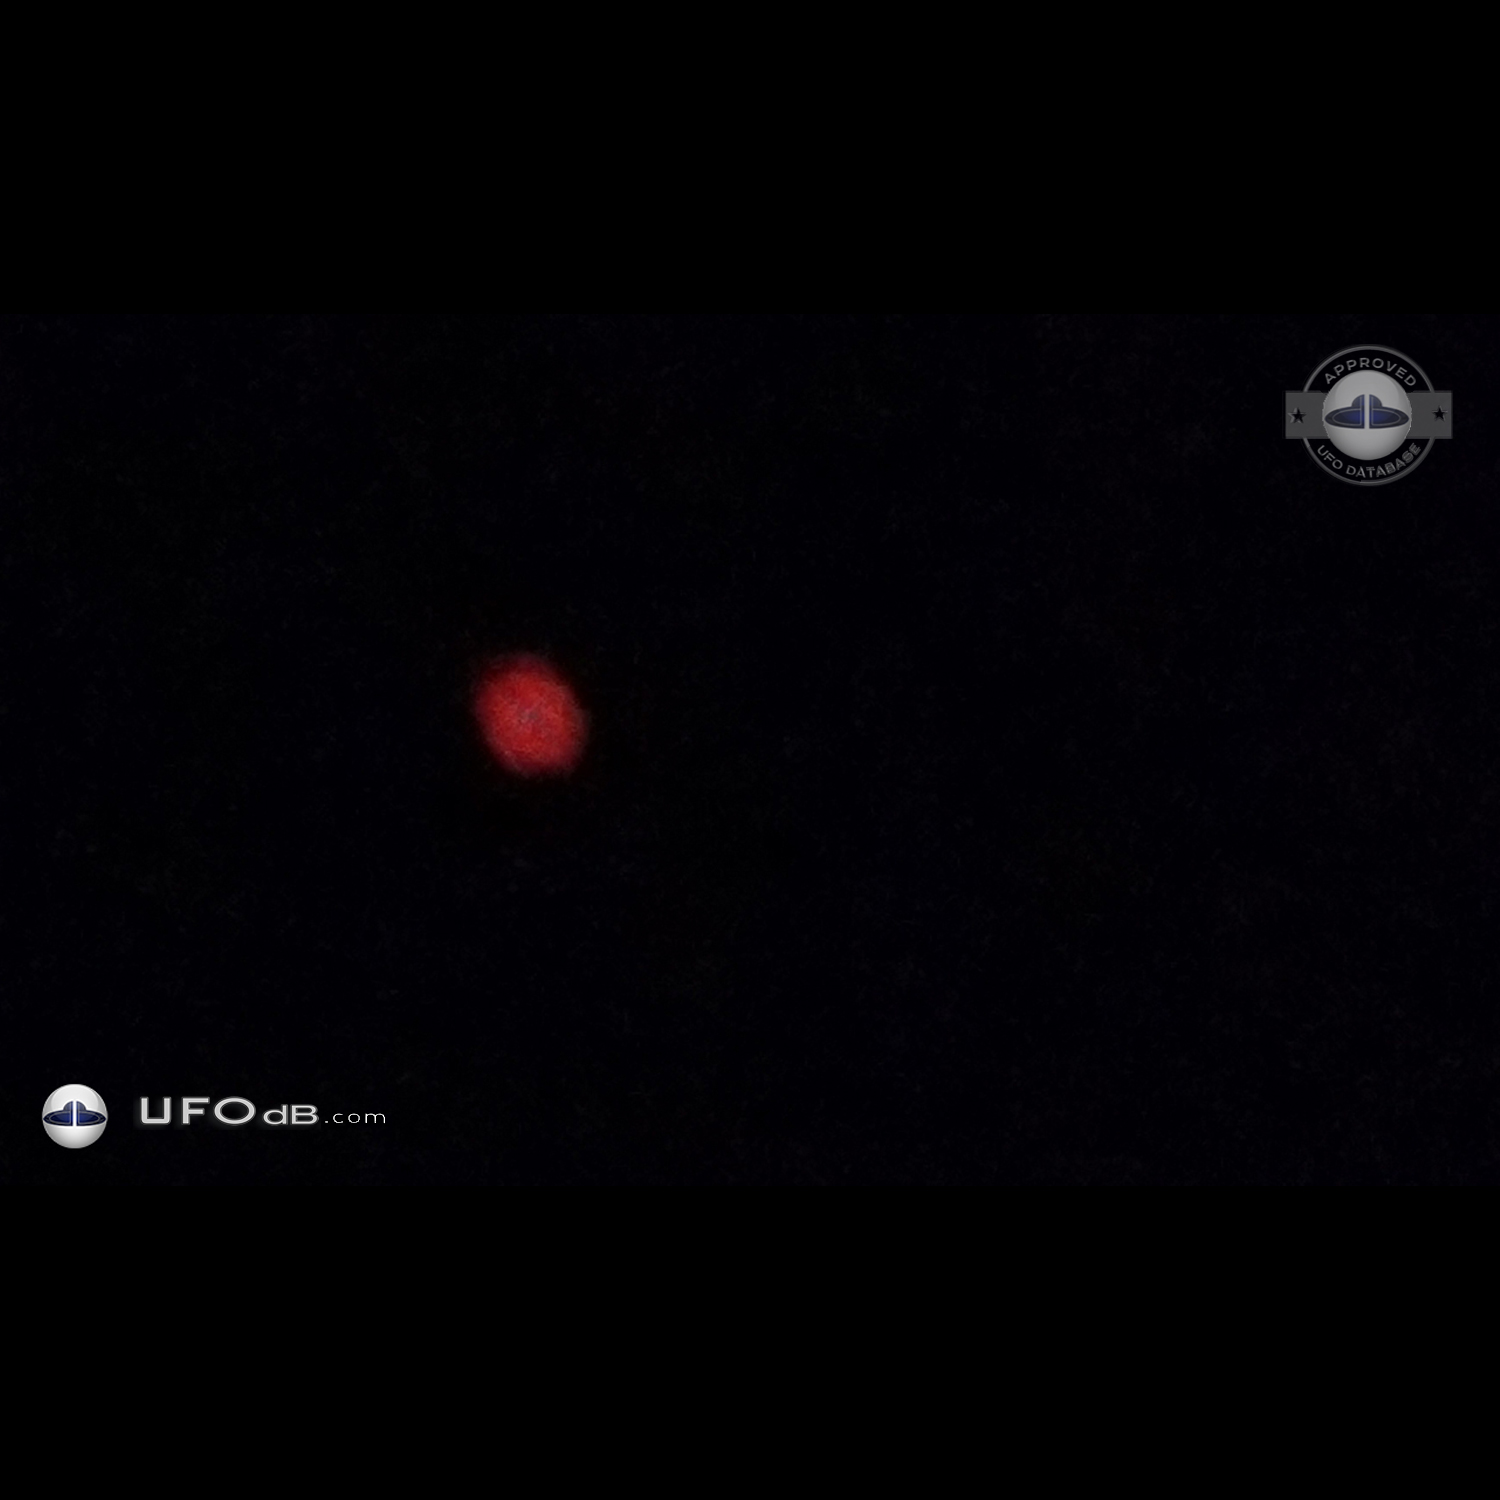 Orange silent ball UFO that moved quickly - Oadby, Leicestershire 2014 UFO Picture #666-3